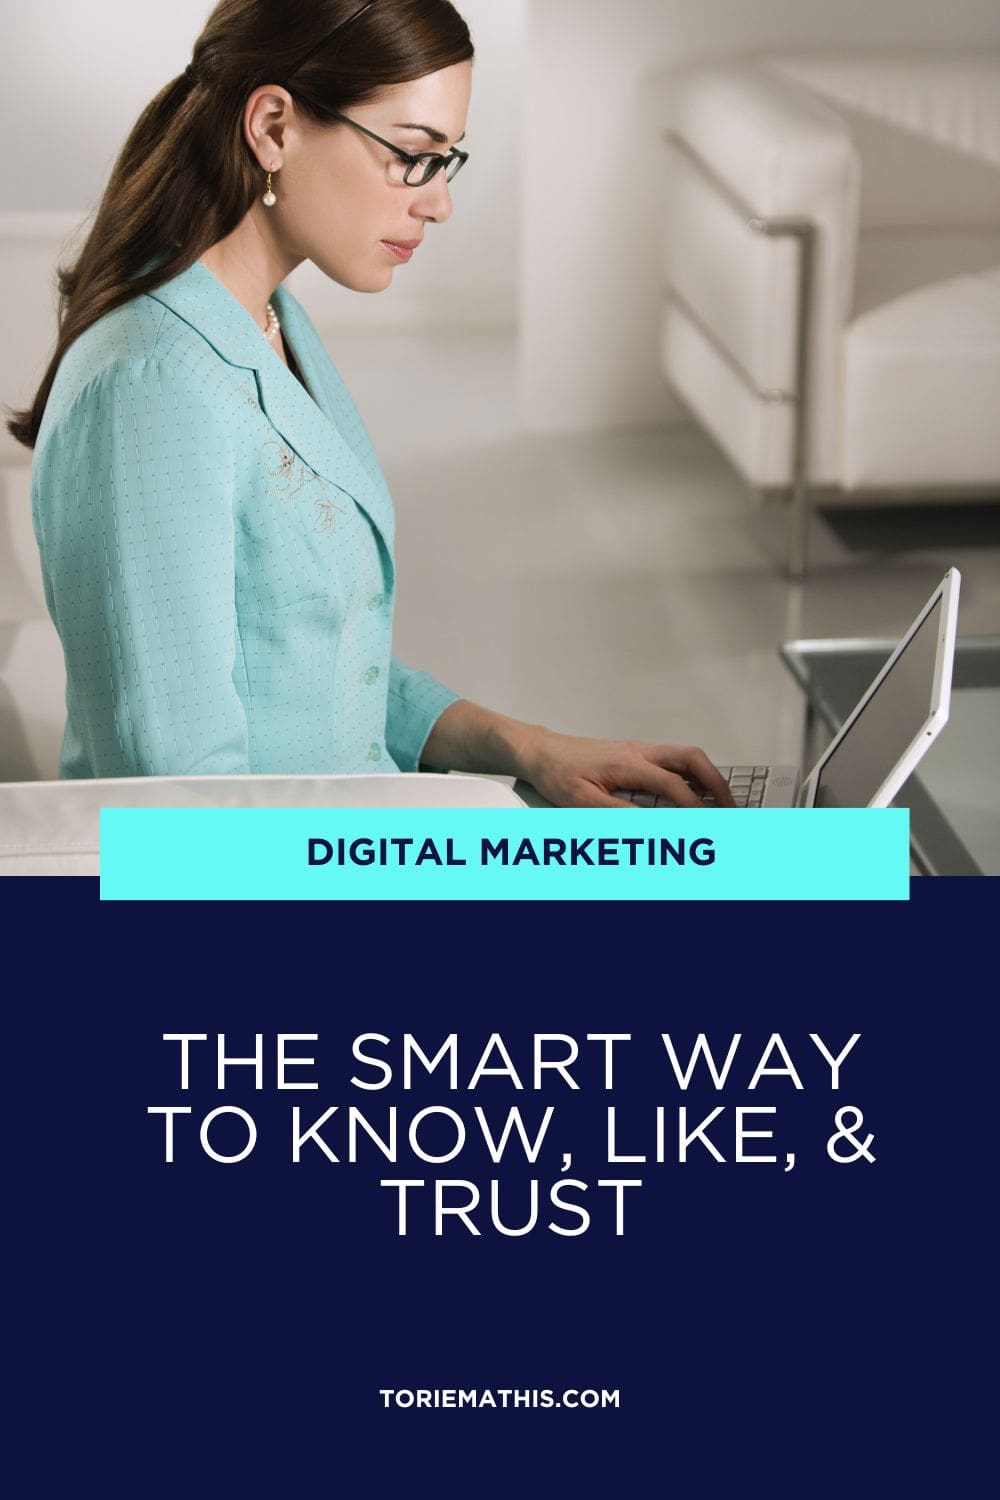 Email Marketing Basics The Smart Way to Know, Like, & Trust